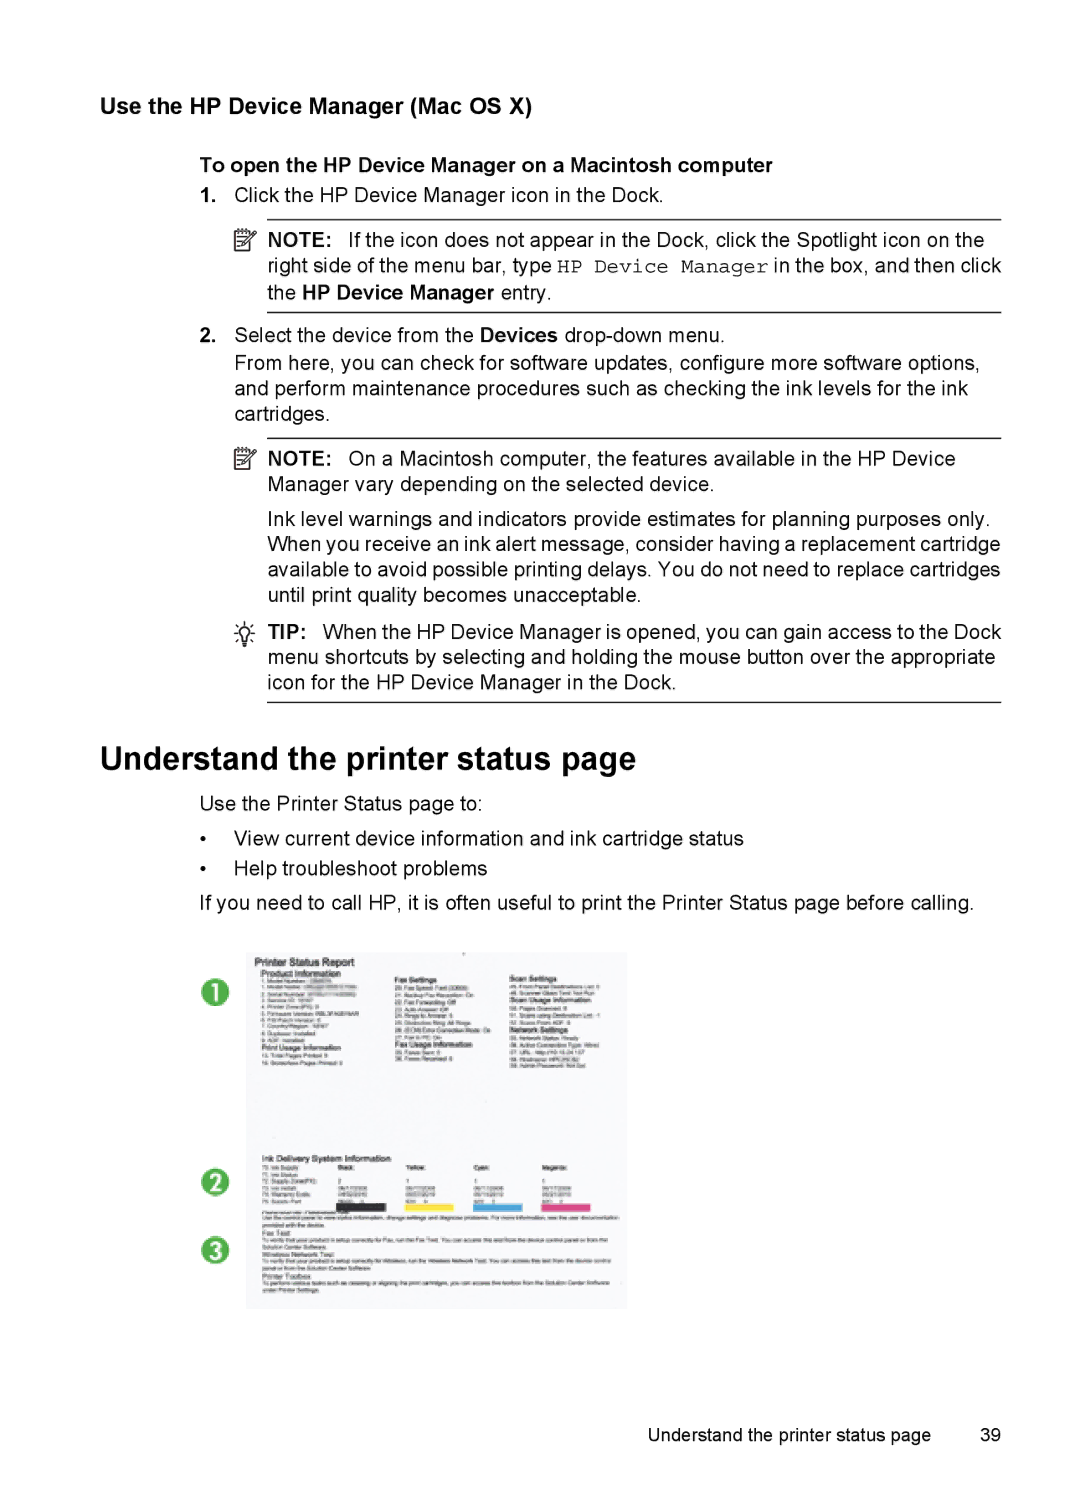 Hitachi C9295A#B1H, E609 manual Understand the printer status, Use the HP Device Manager Mac OS 